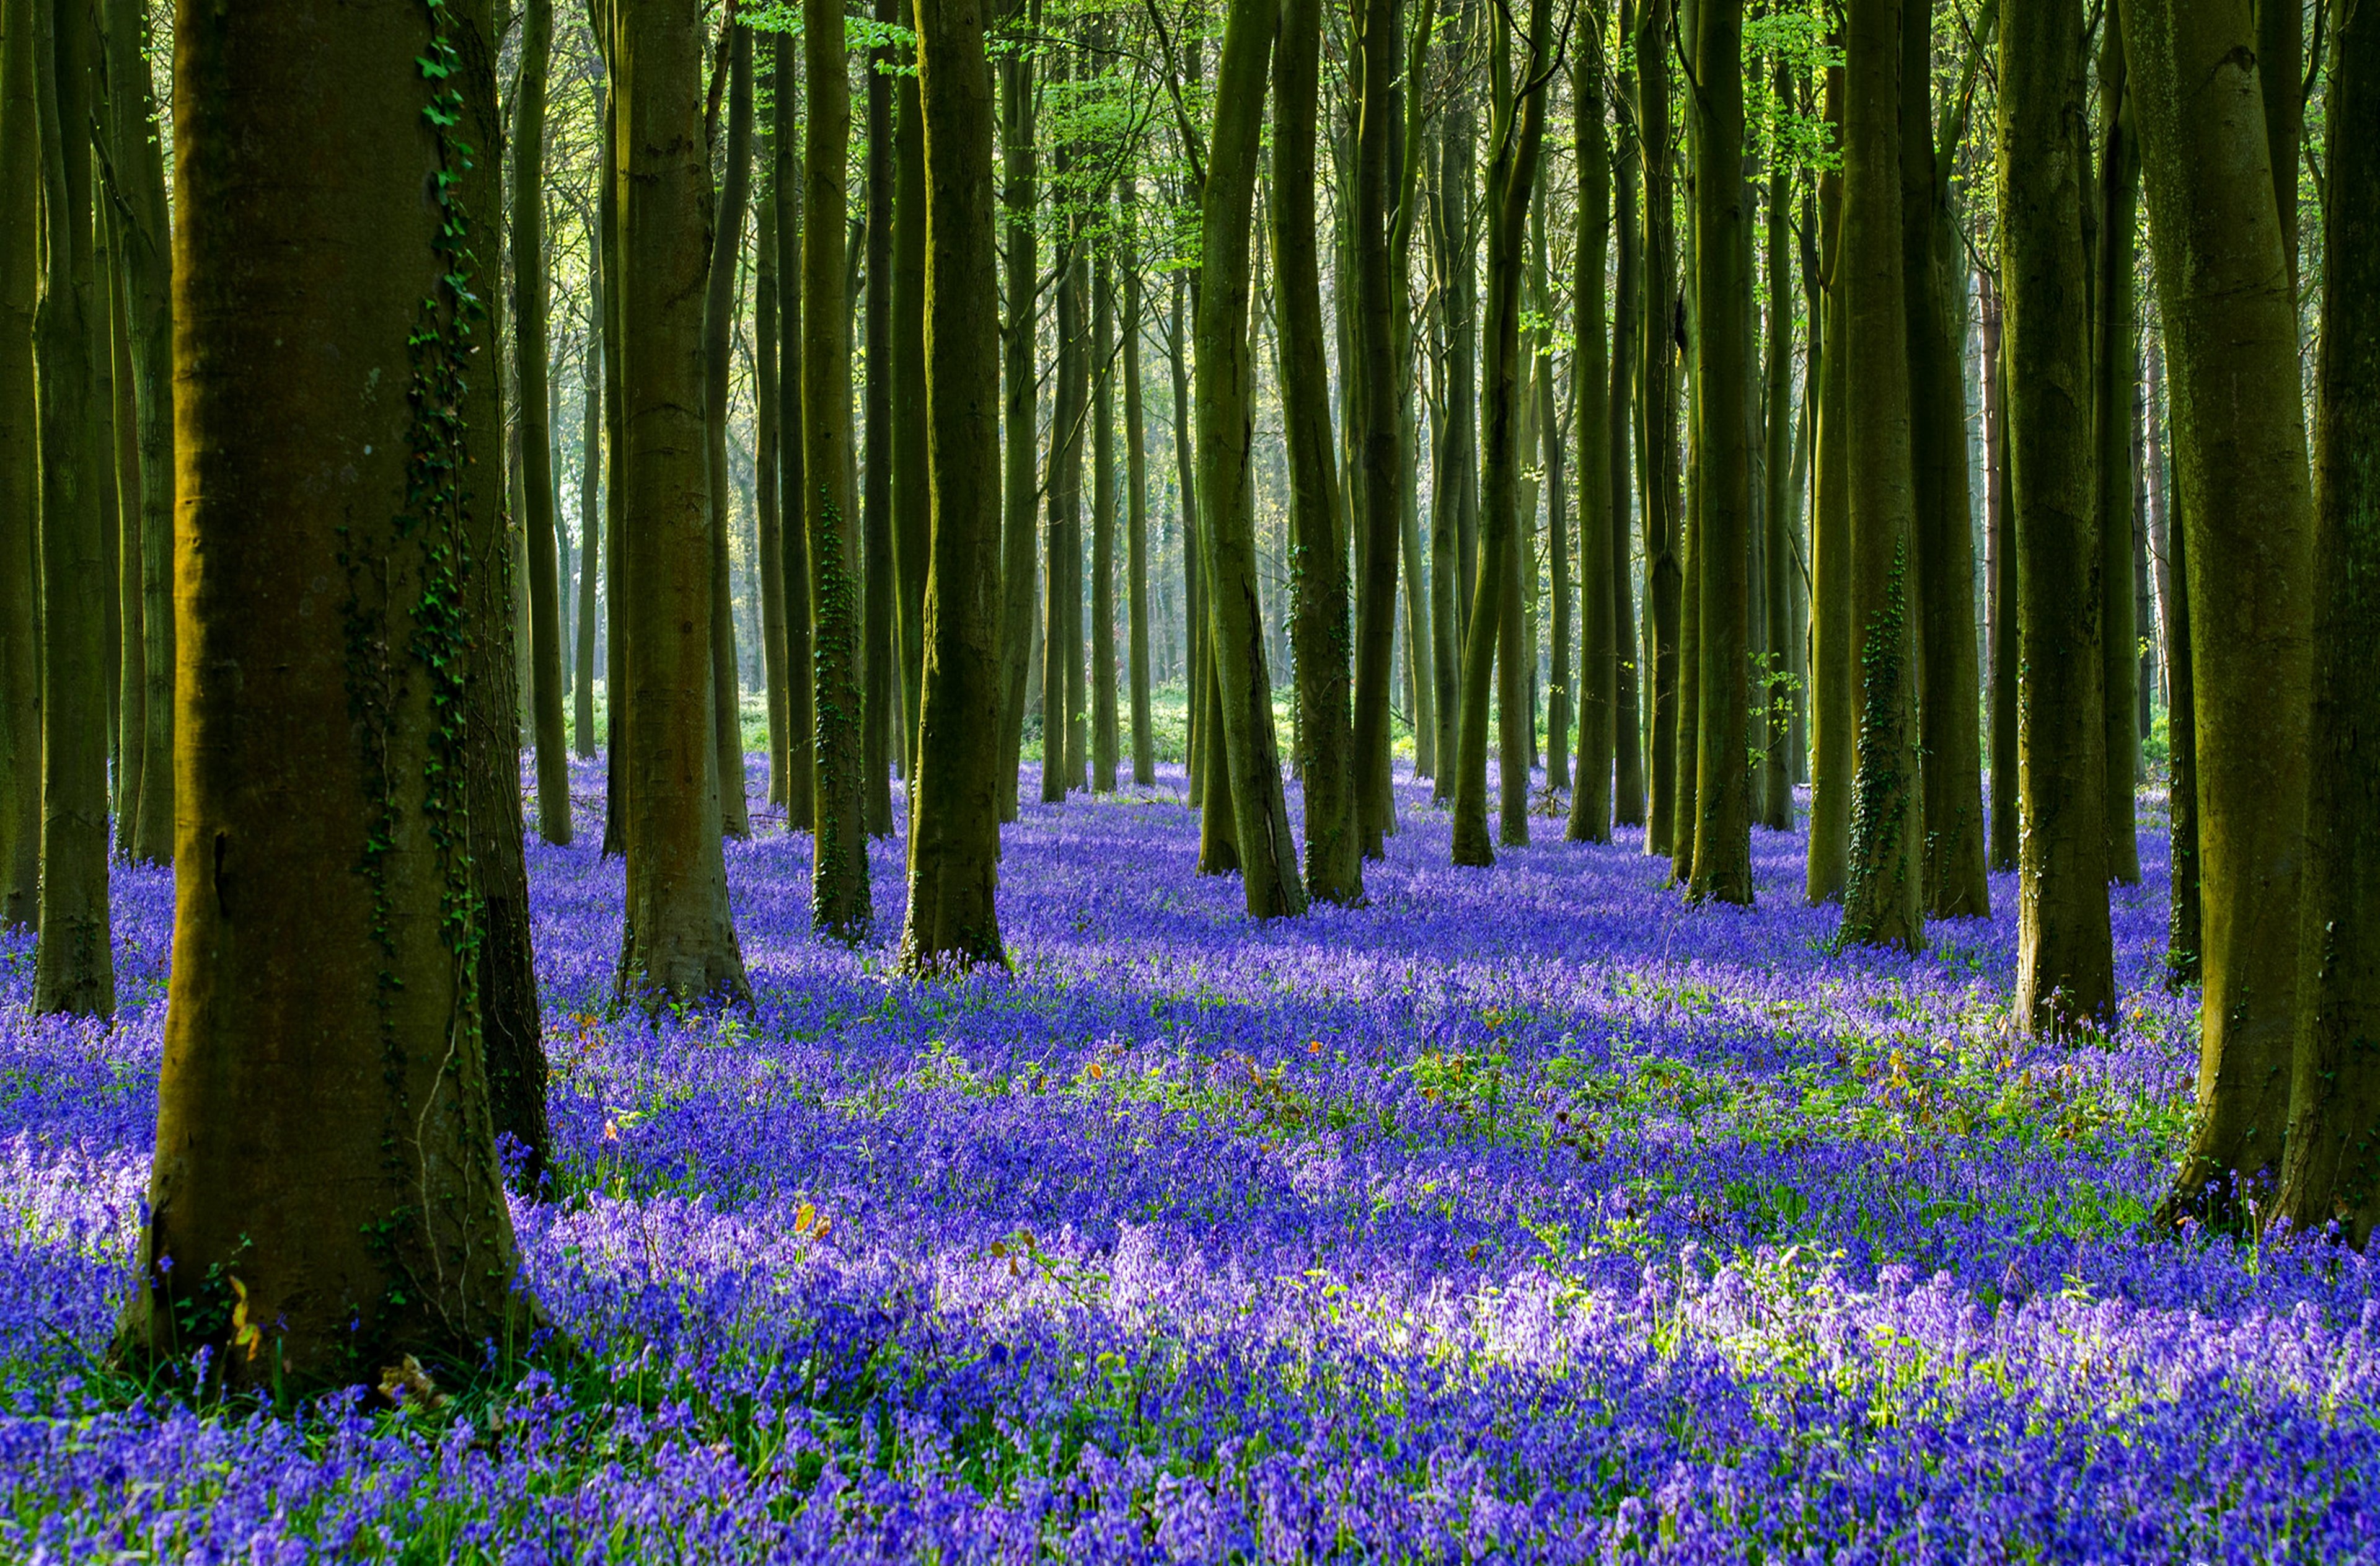 Forest Trees With Flowers - 3840x2526 Wallpaper 